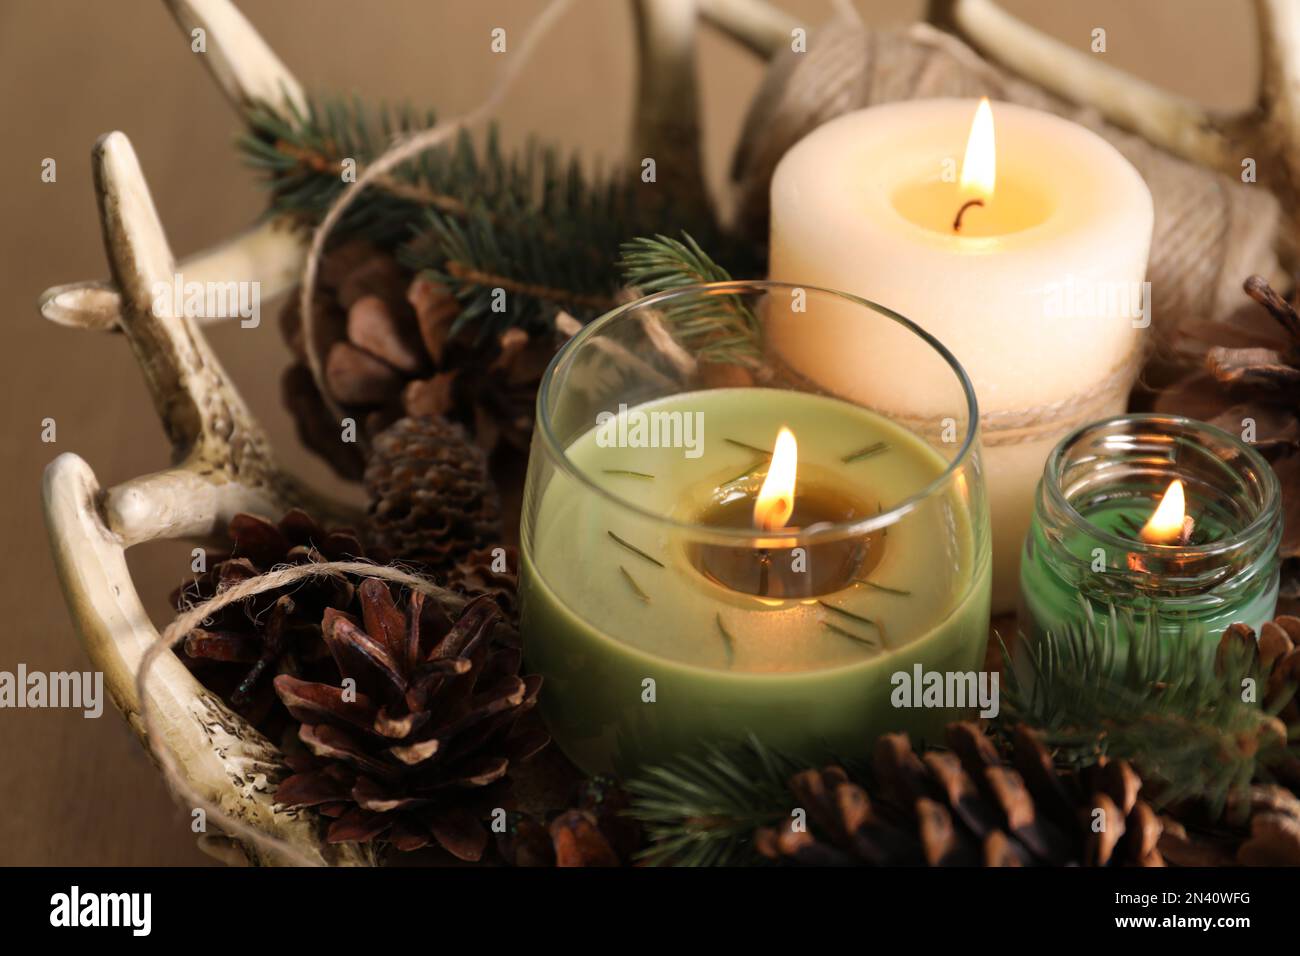 Closeup Shot of a Decorative Candle with Beads and Dried Flowers on a Tray  Stock Photo - Image of nature, crystal: 217749676